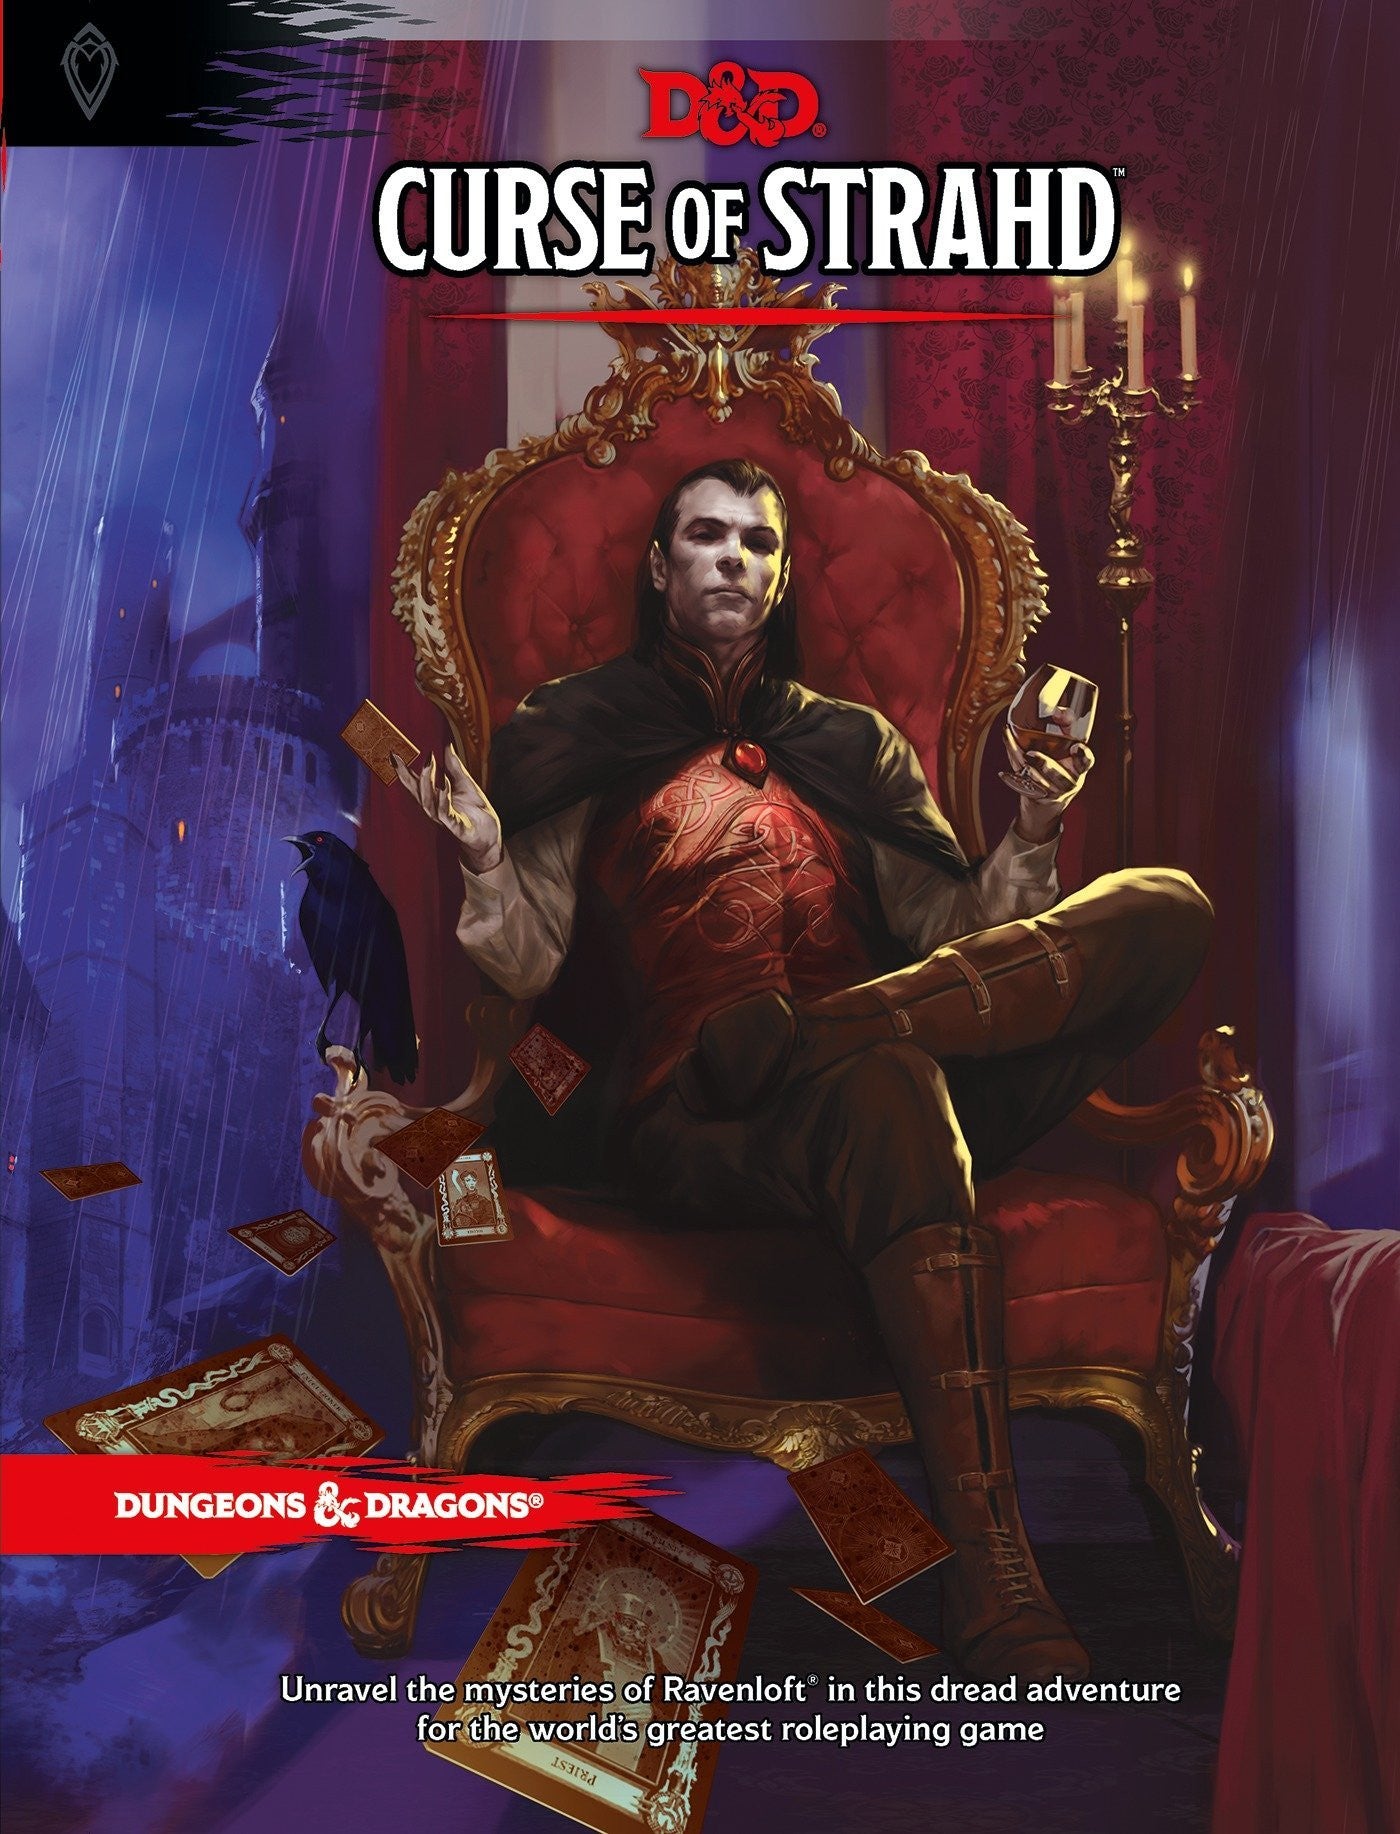 D&D Dungeons & Dragons Curse of Strahd Hardcover